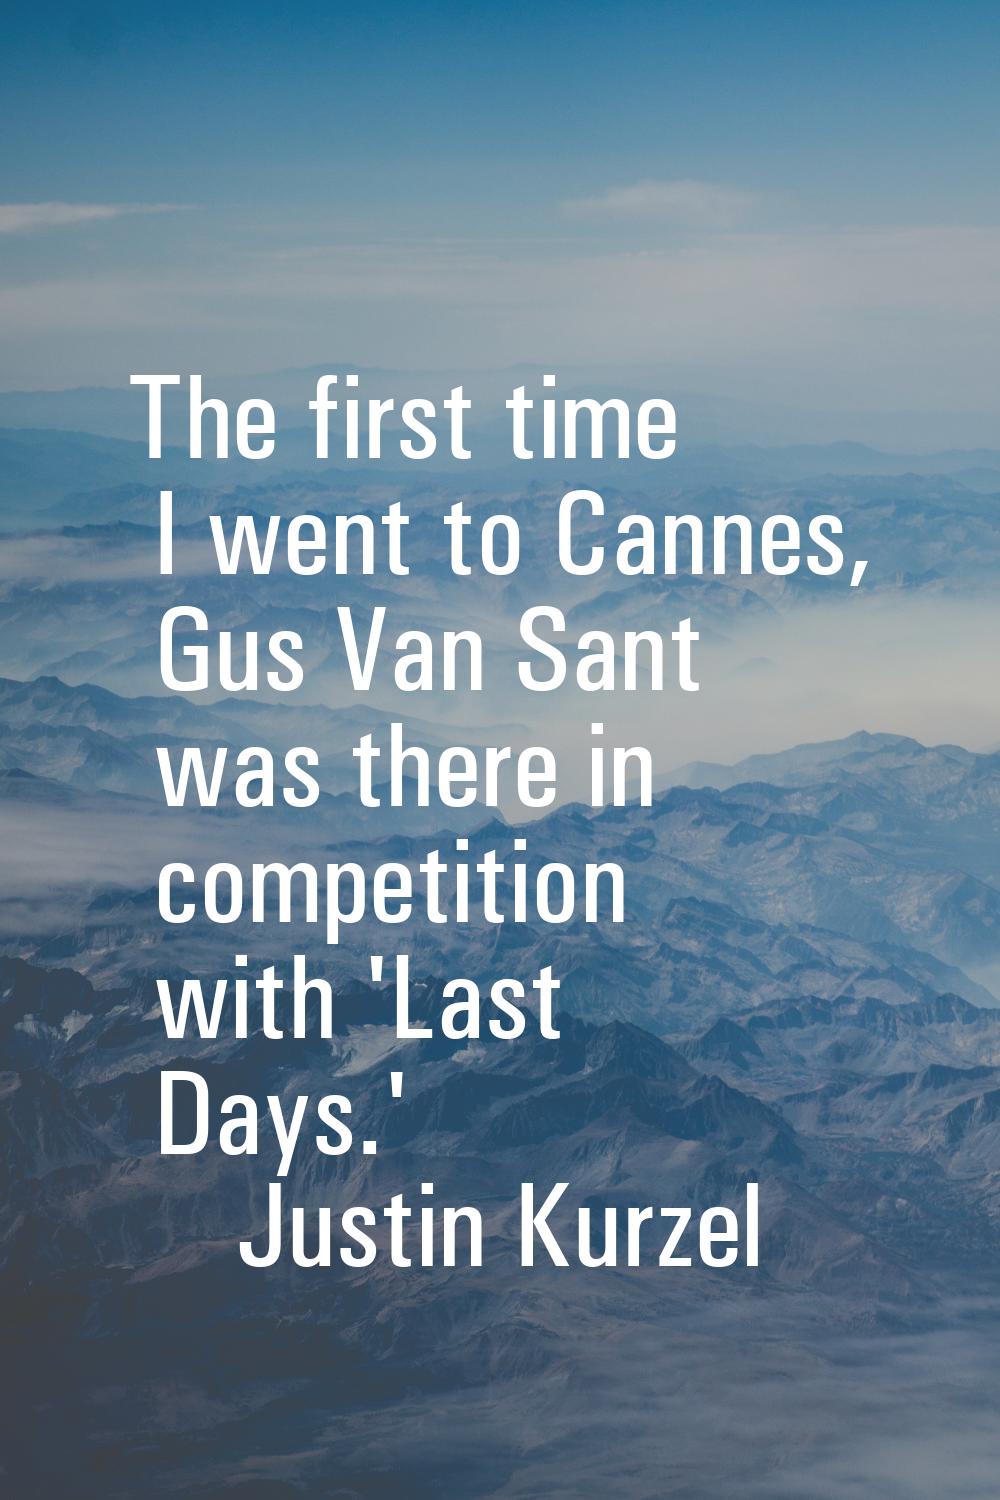 The first time I went to Cannes, Gus Van Sant was there in competition with 'Last Days.'